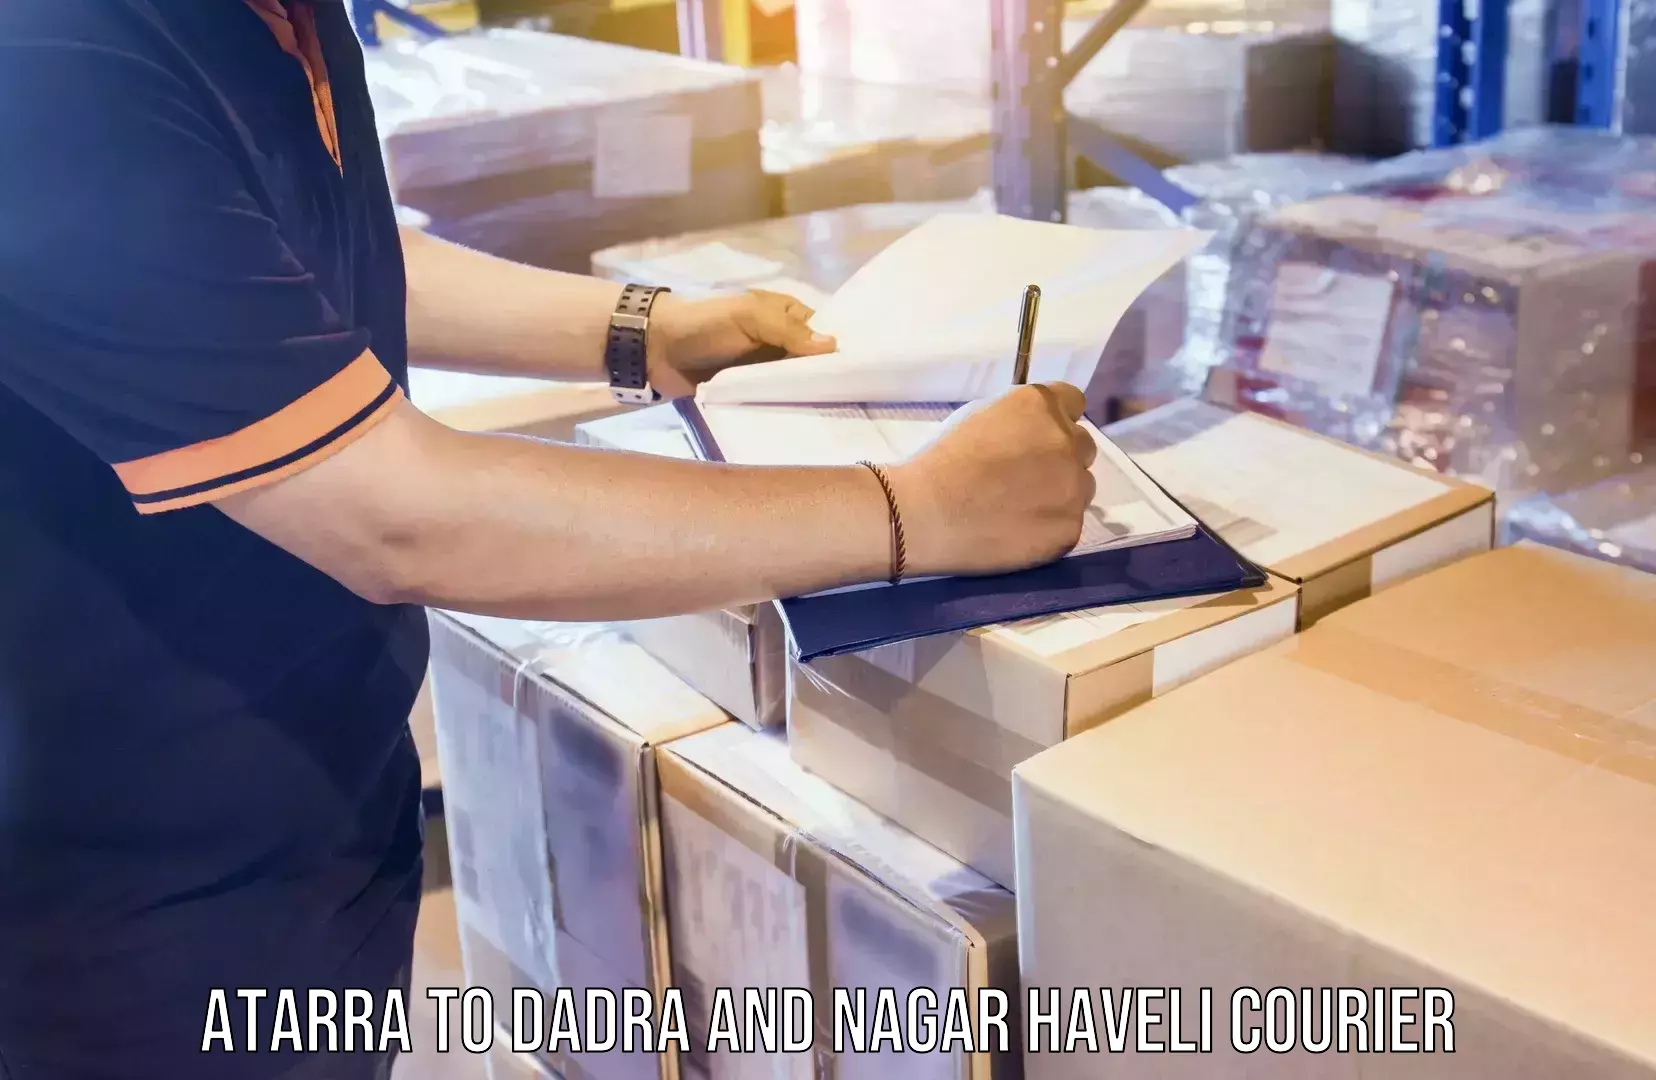 Express courier capabilities in Atarra to Dadra and Nagar Haveli